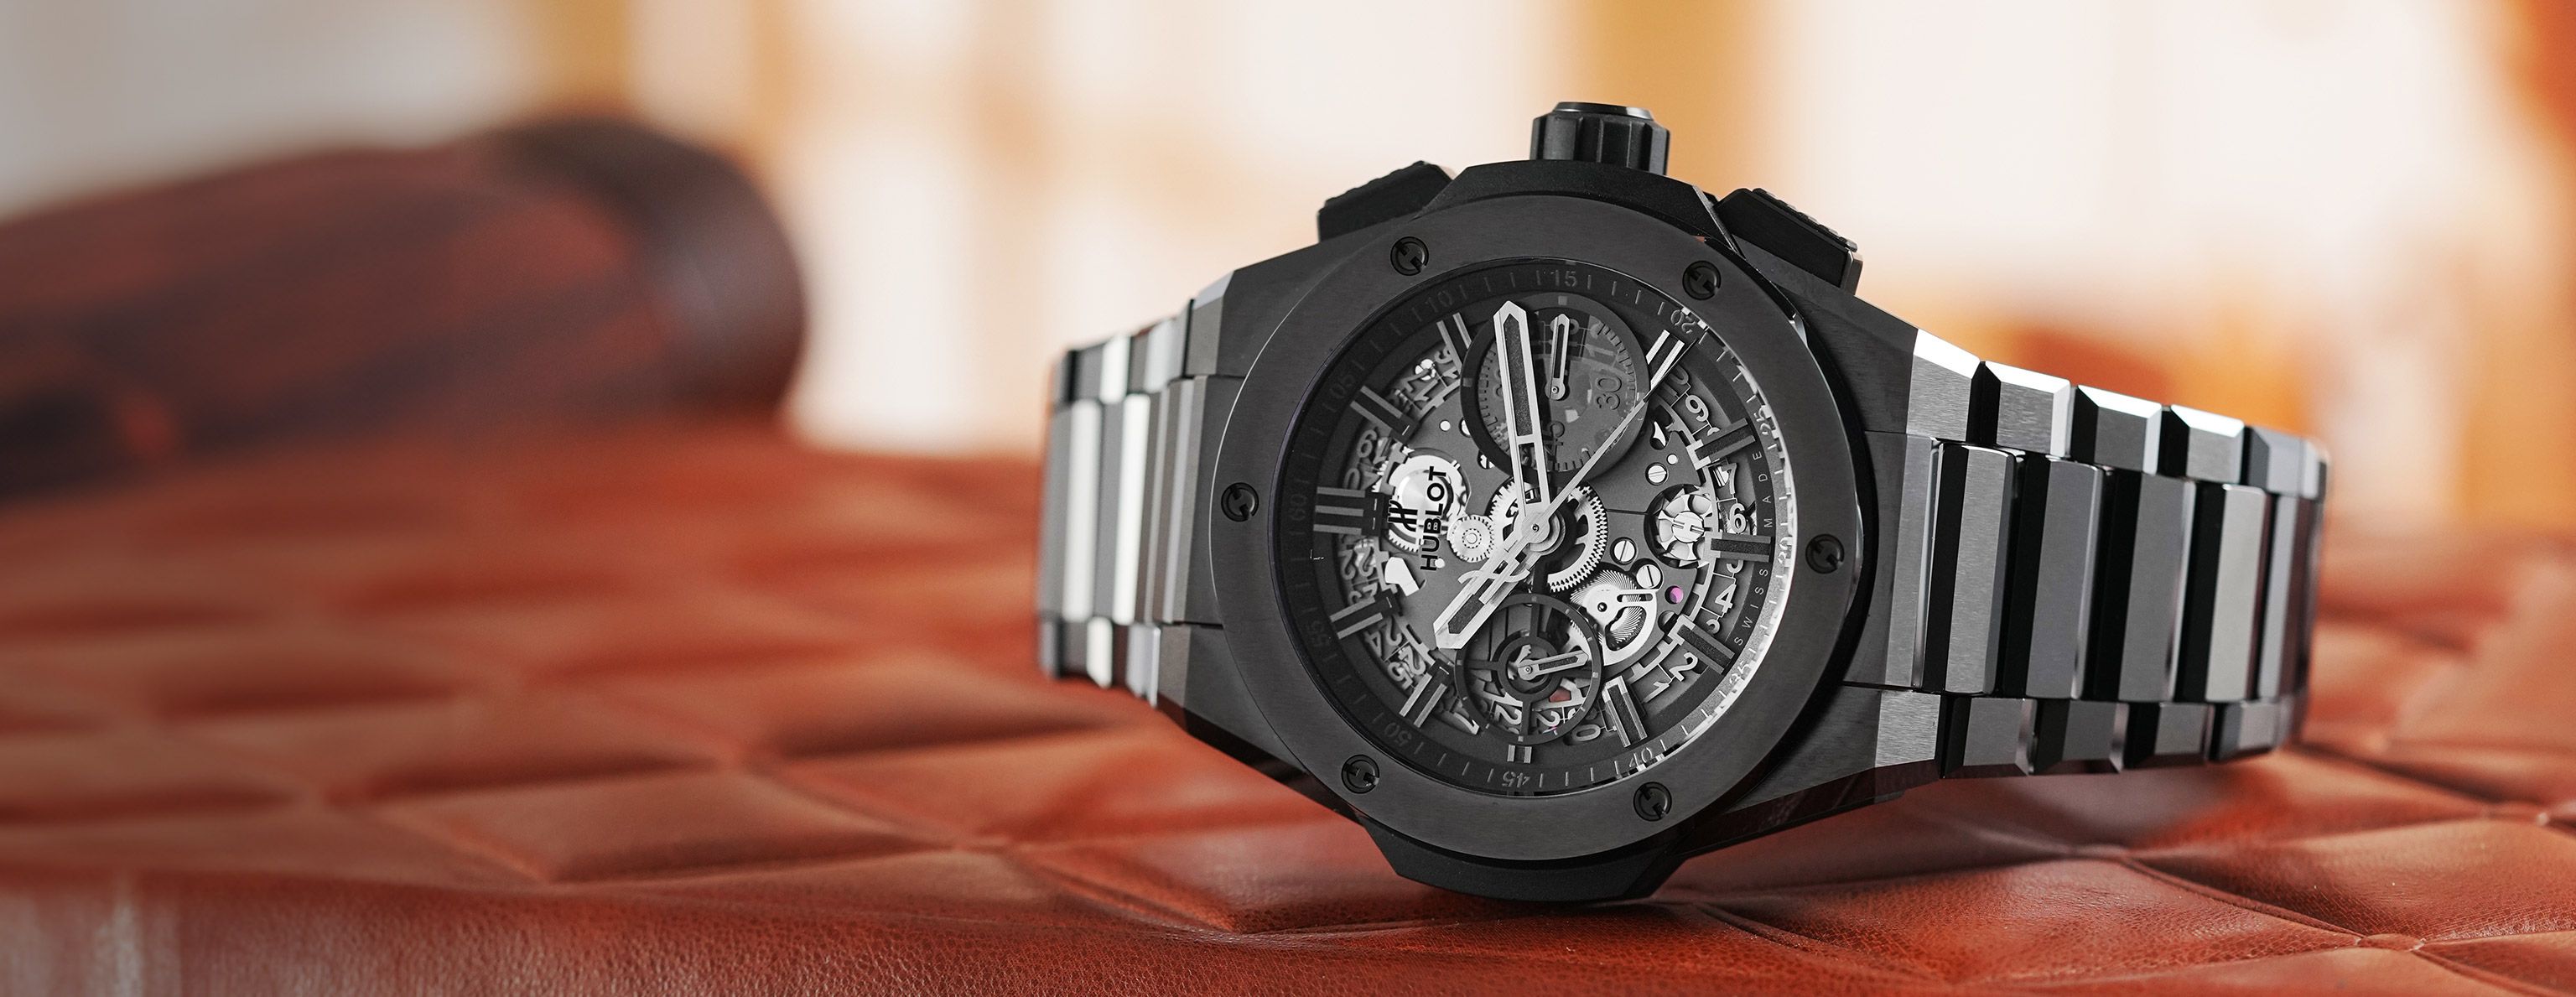 Raise your watch game with this avant garde Big Bang